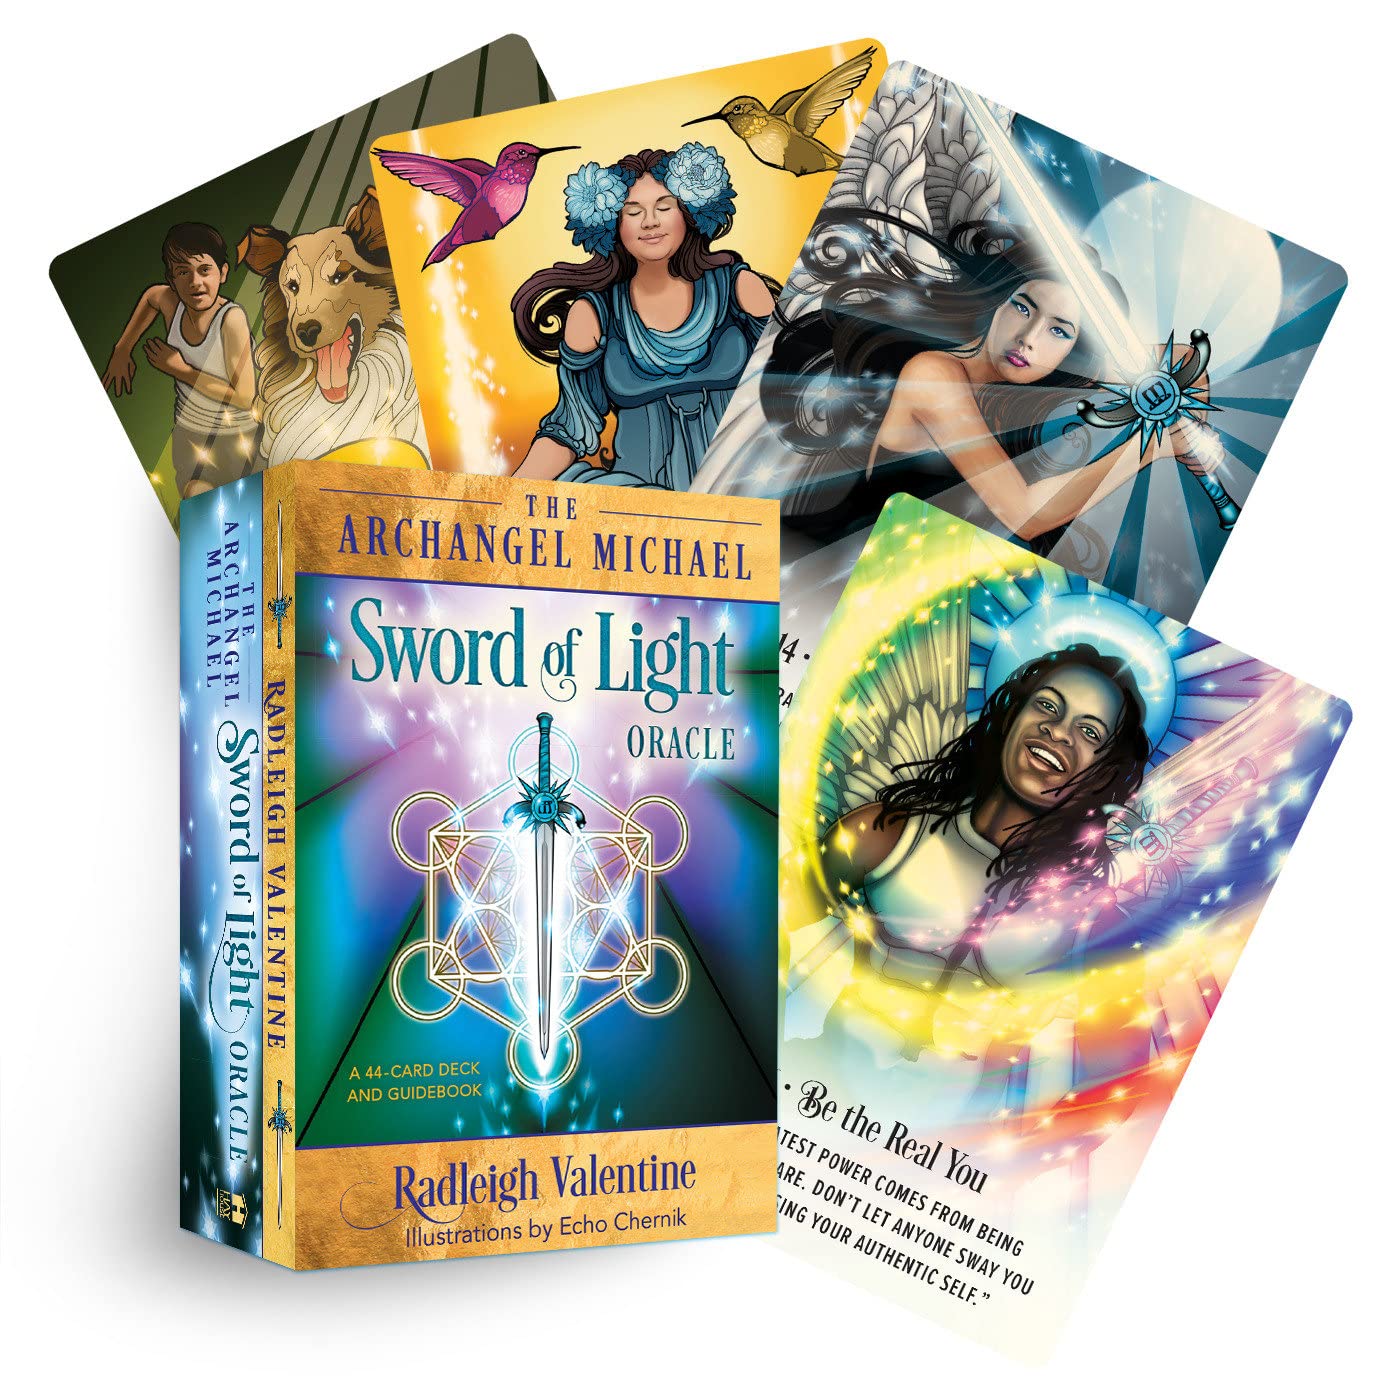 The Archangel Michael Sword of Light Oracle: A 44-Card Deck and Guidebook || Radleigh Valentine